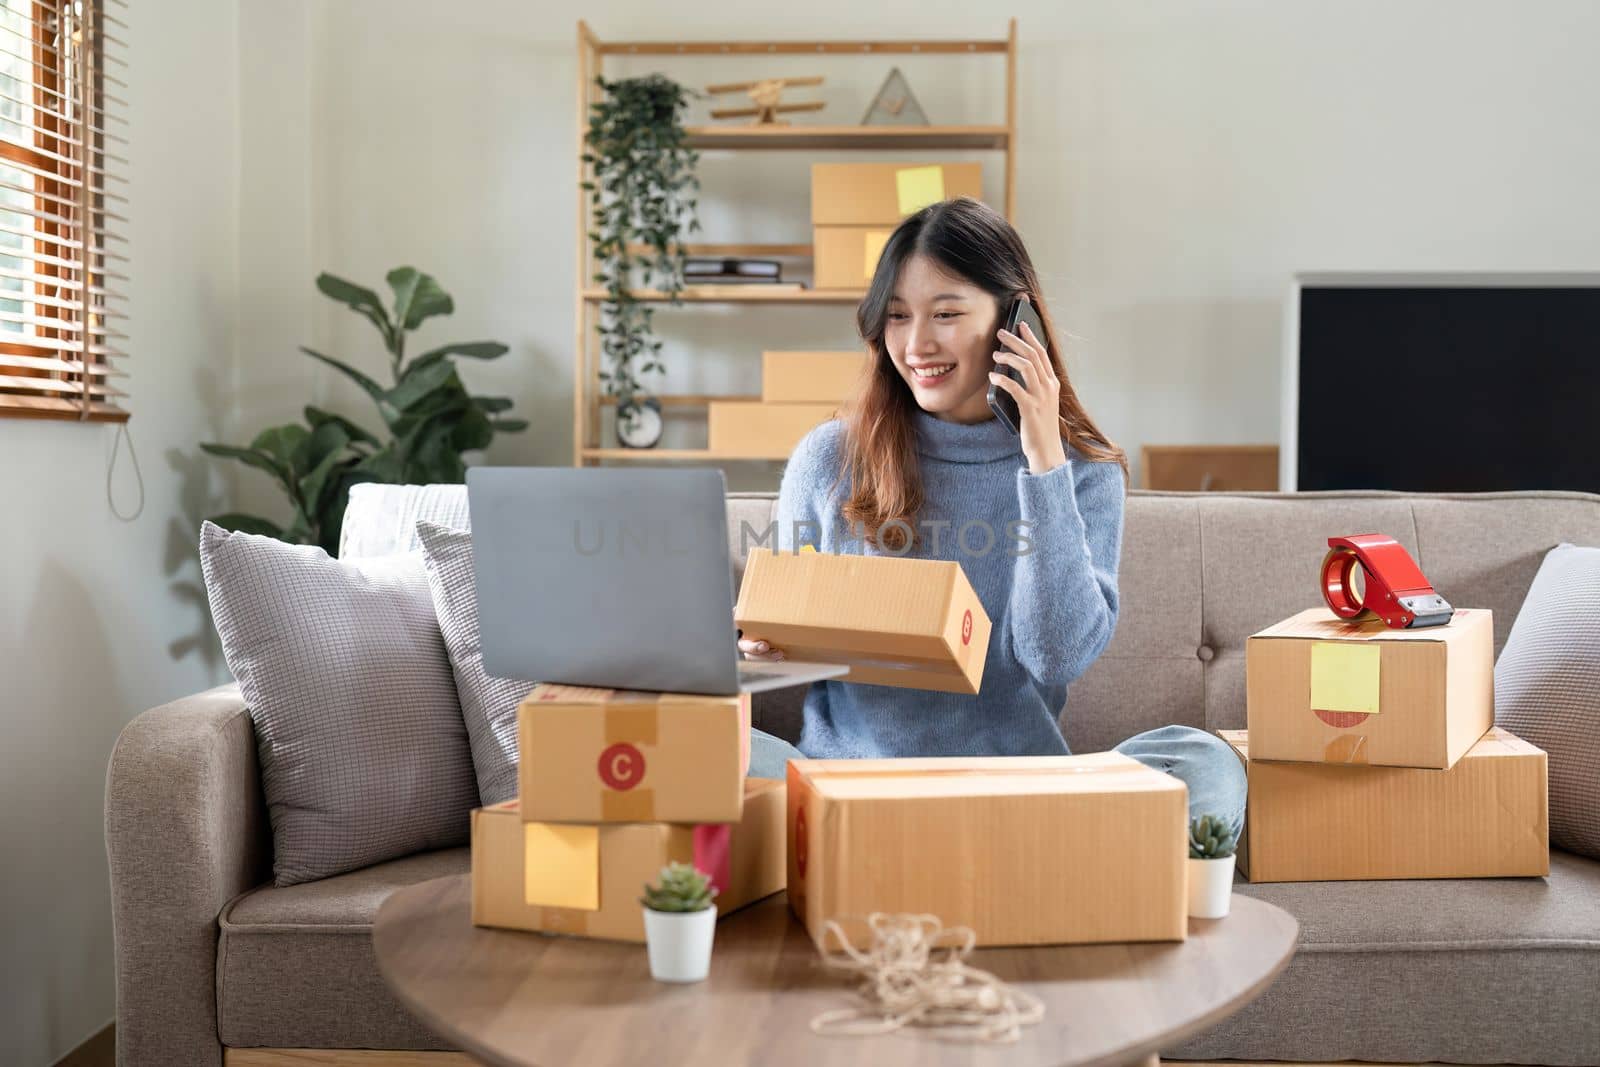 Small business entrepreneur SME freelance woman using phone call receive from customer checking product on stock at home office, online marketing packaging delivery box, SME e-commerce concept.